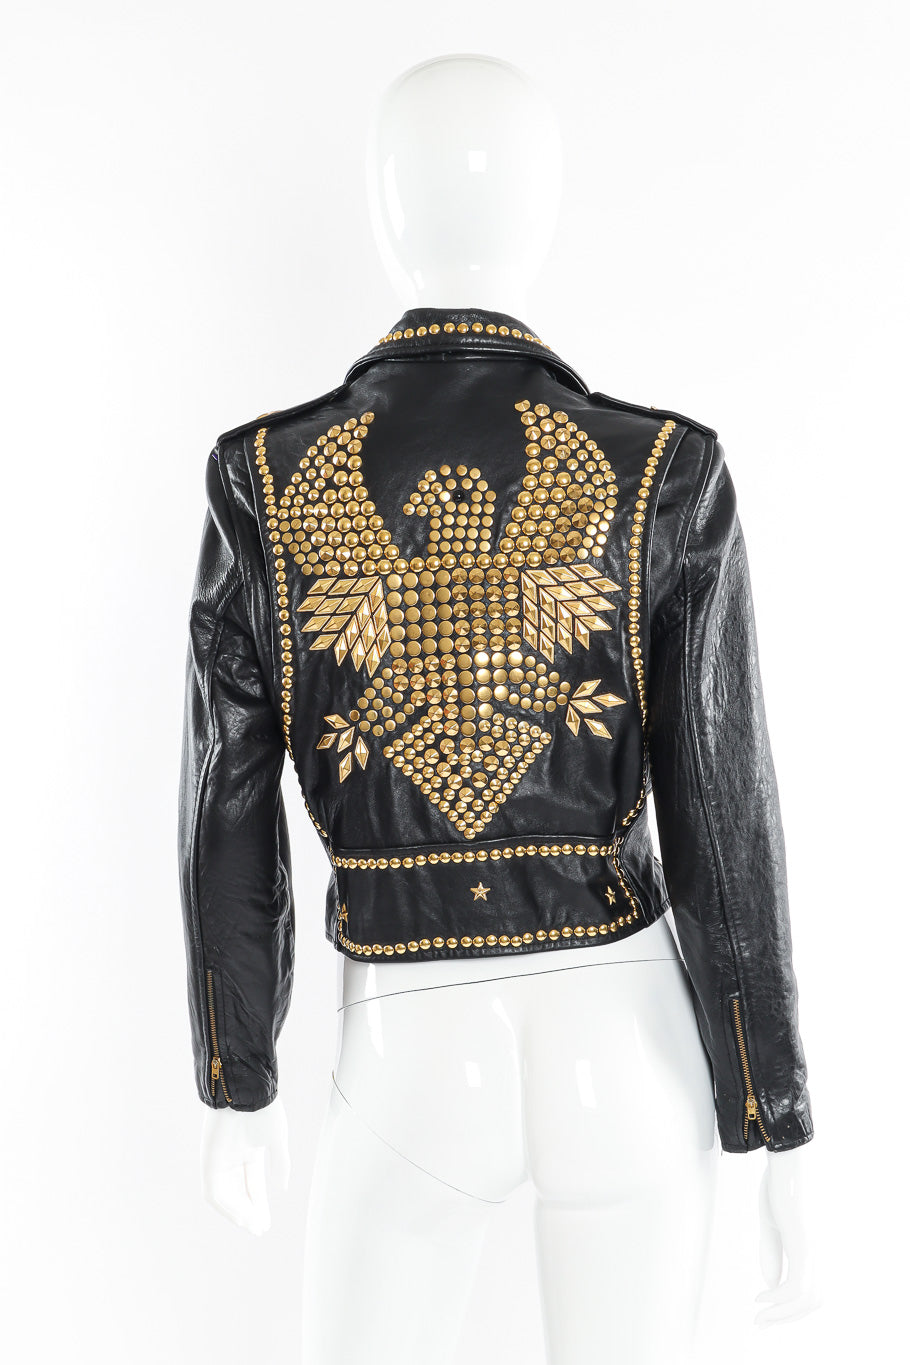 Motorcycle zip jacket by Caché mannequin back @recessla